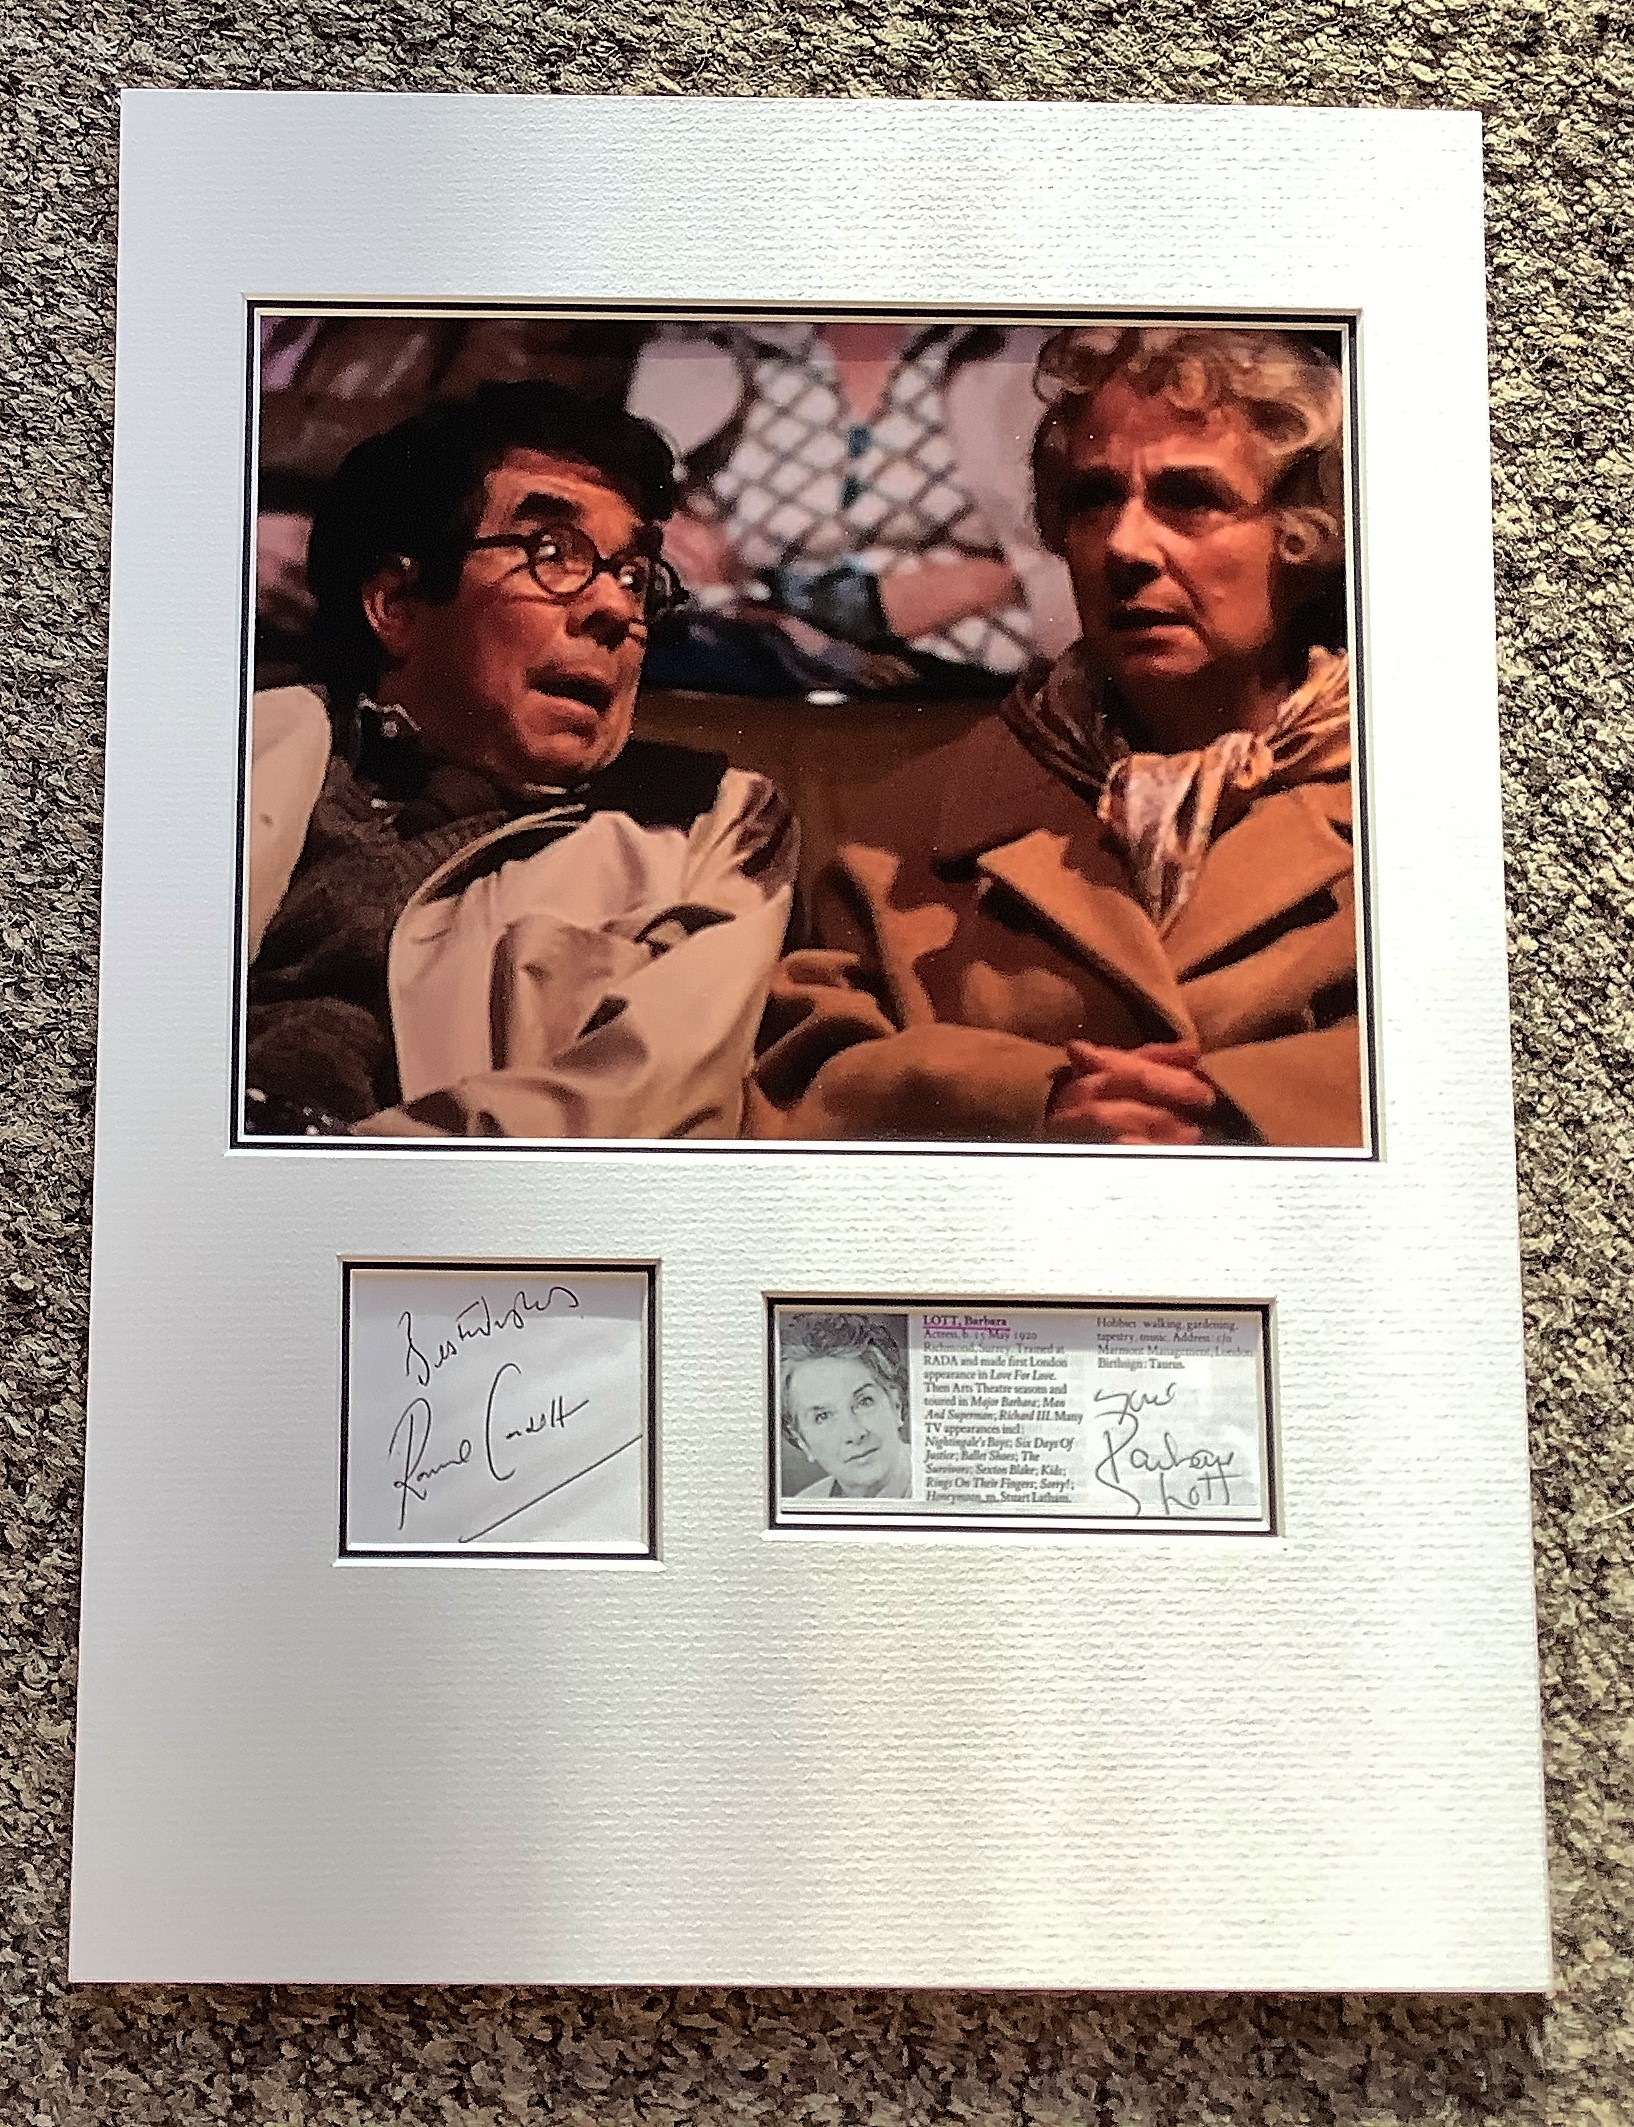 Ronnie Corbett and Barbara Lott 12x12 Sorry mounted signature piece includes two signed album